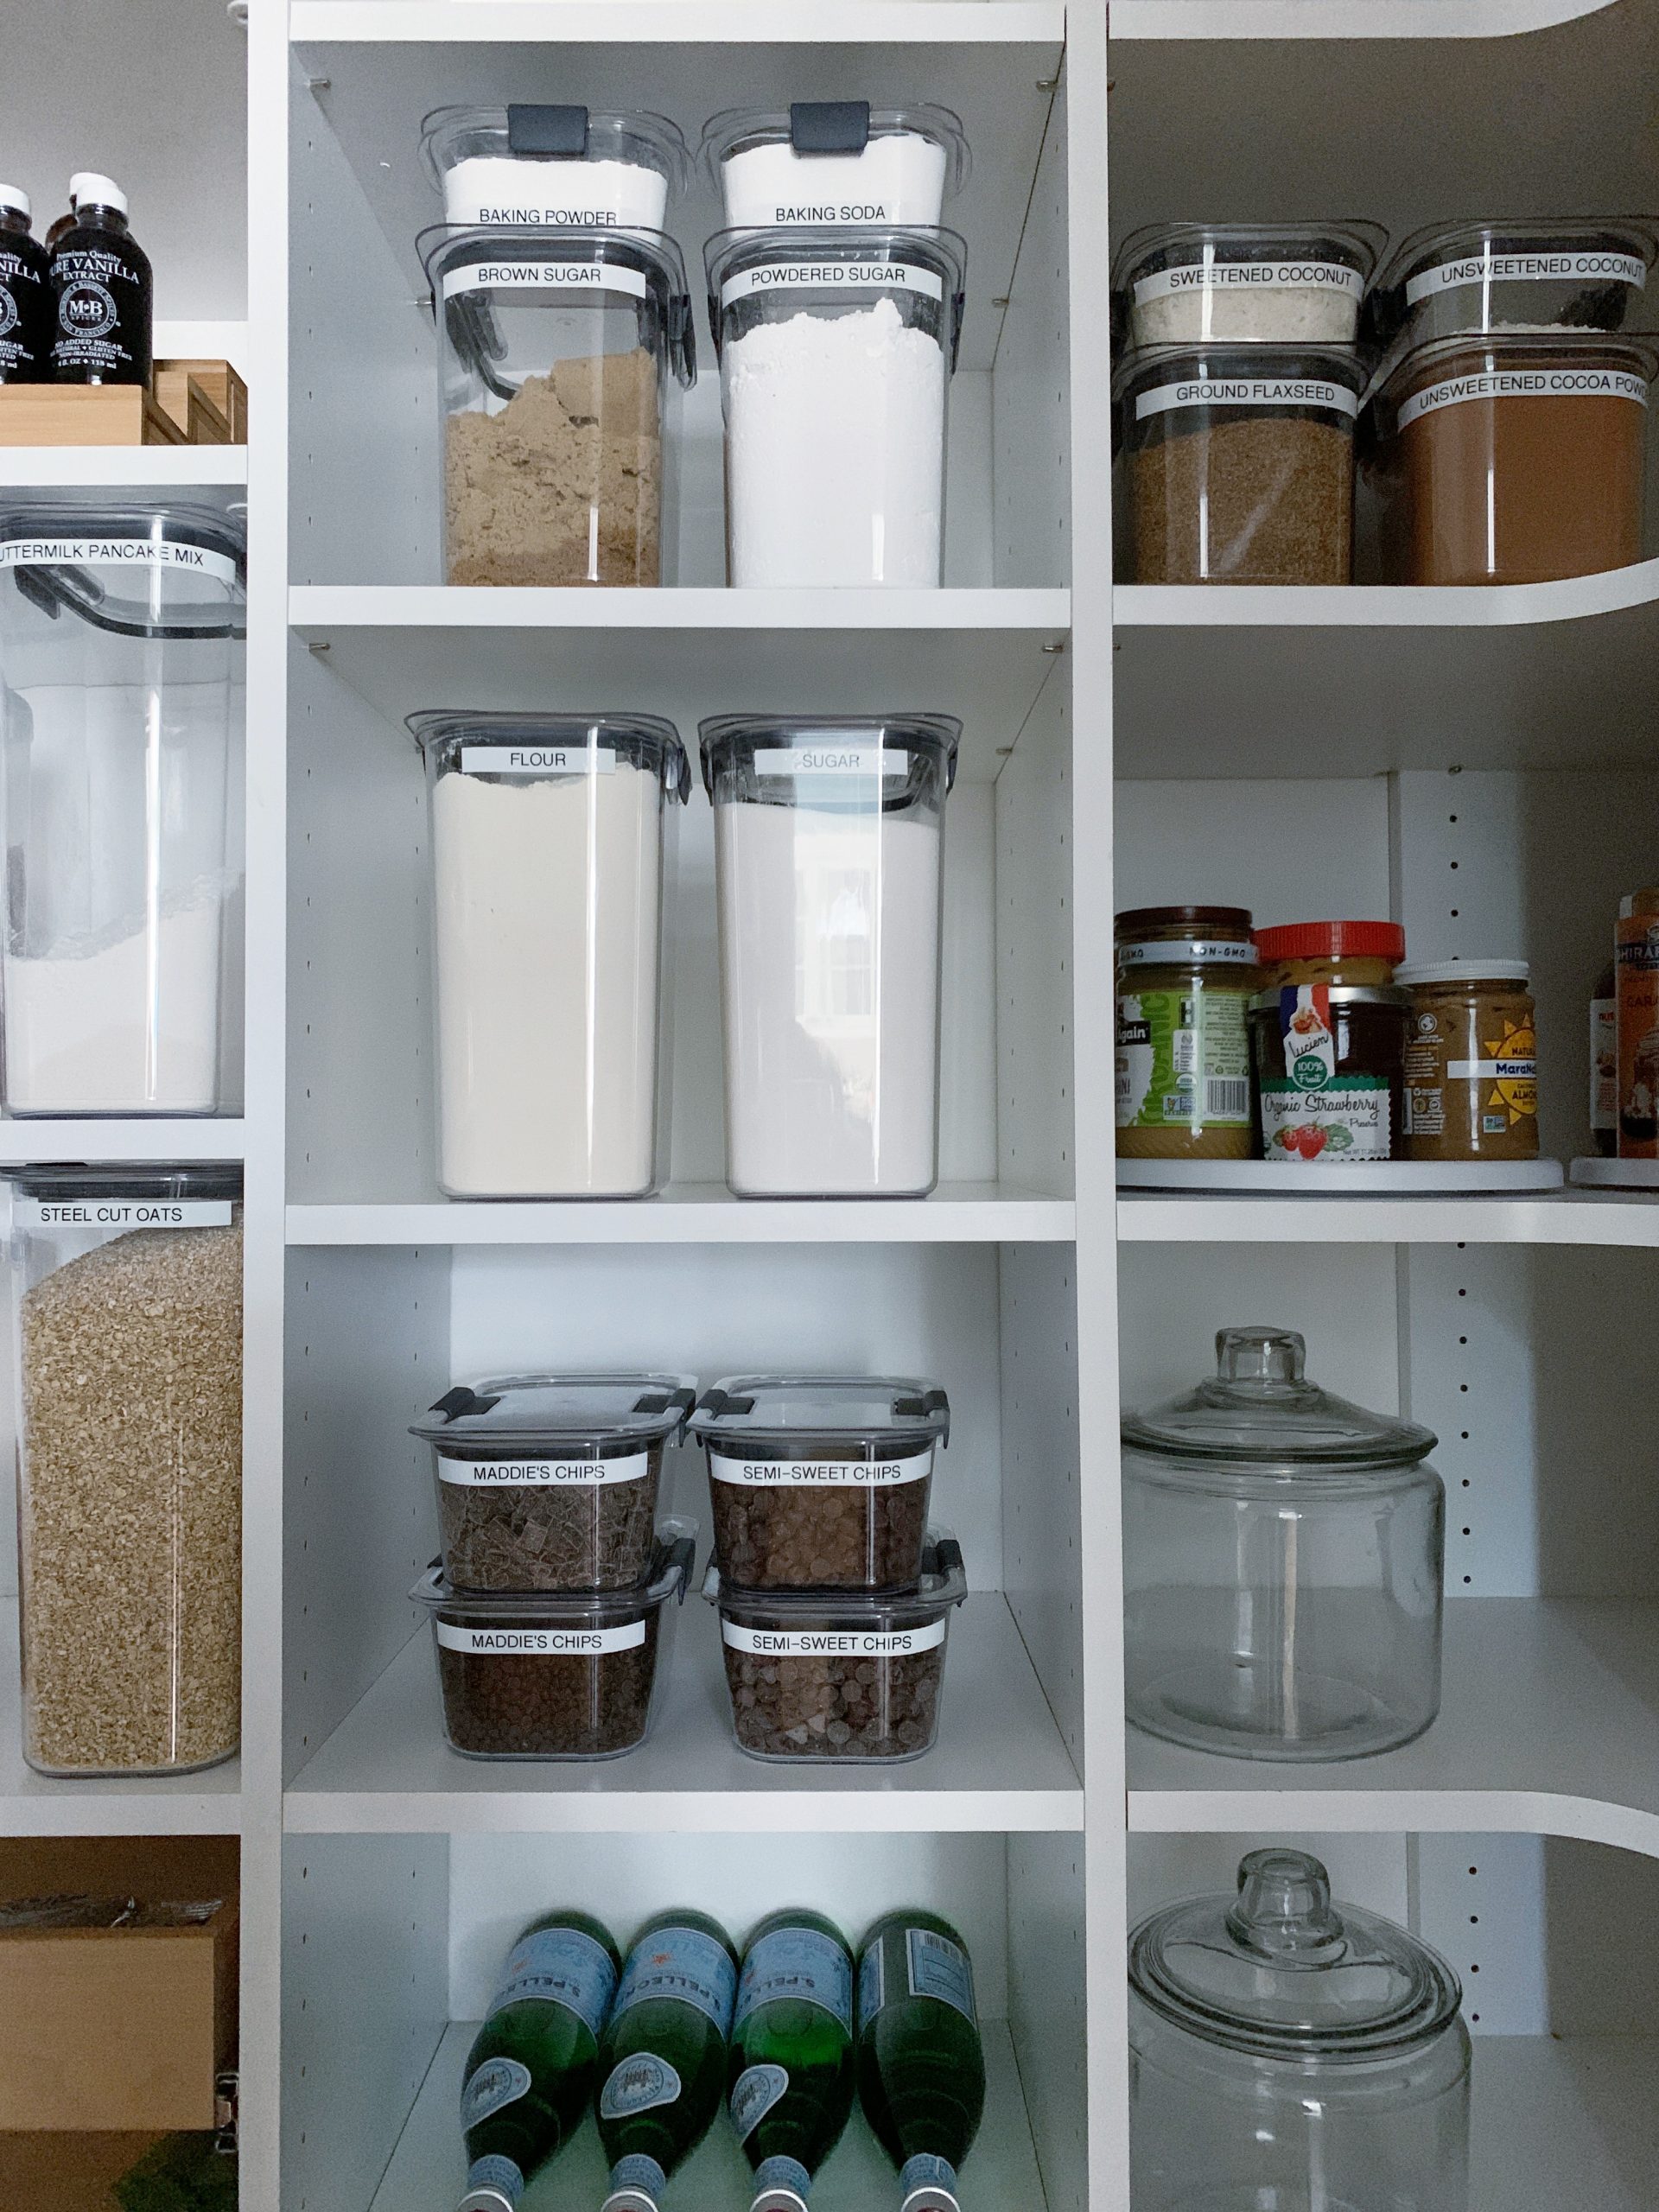 Time to get organized with #rubbermaid These Brilliance Pantry product